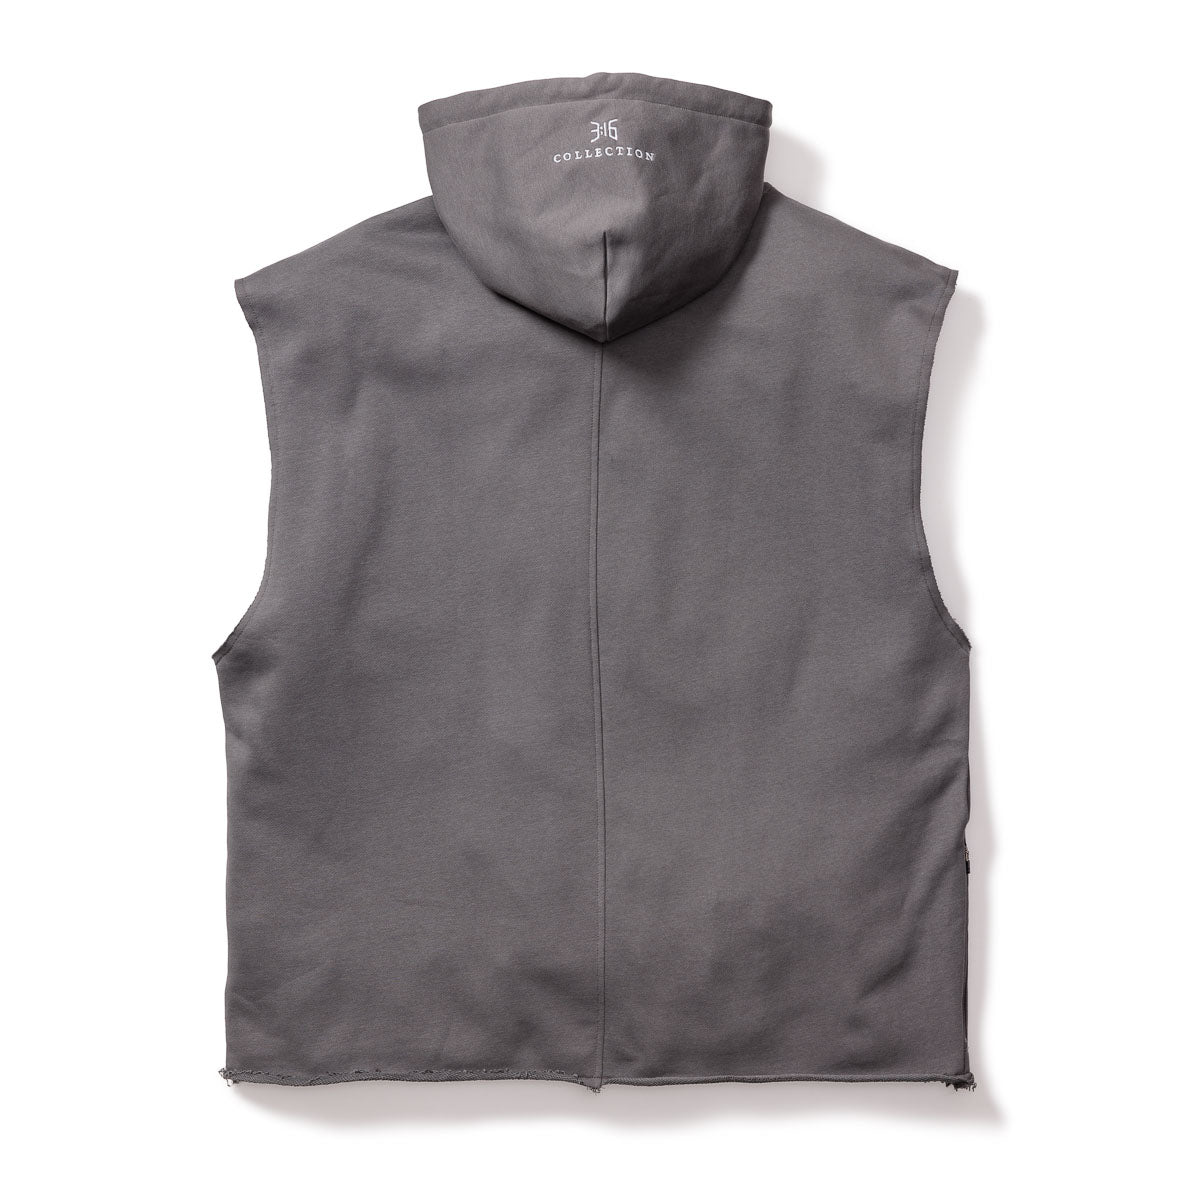 3:16 Sleeveless Hoodie - GRAY - 316collection